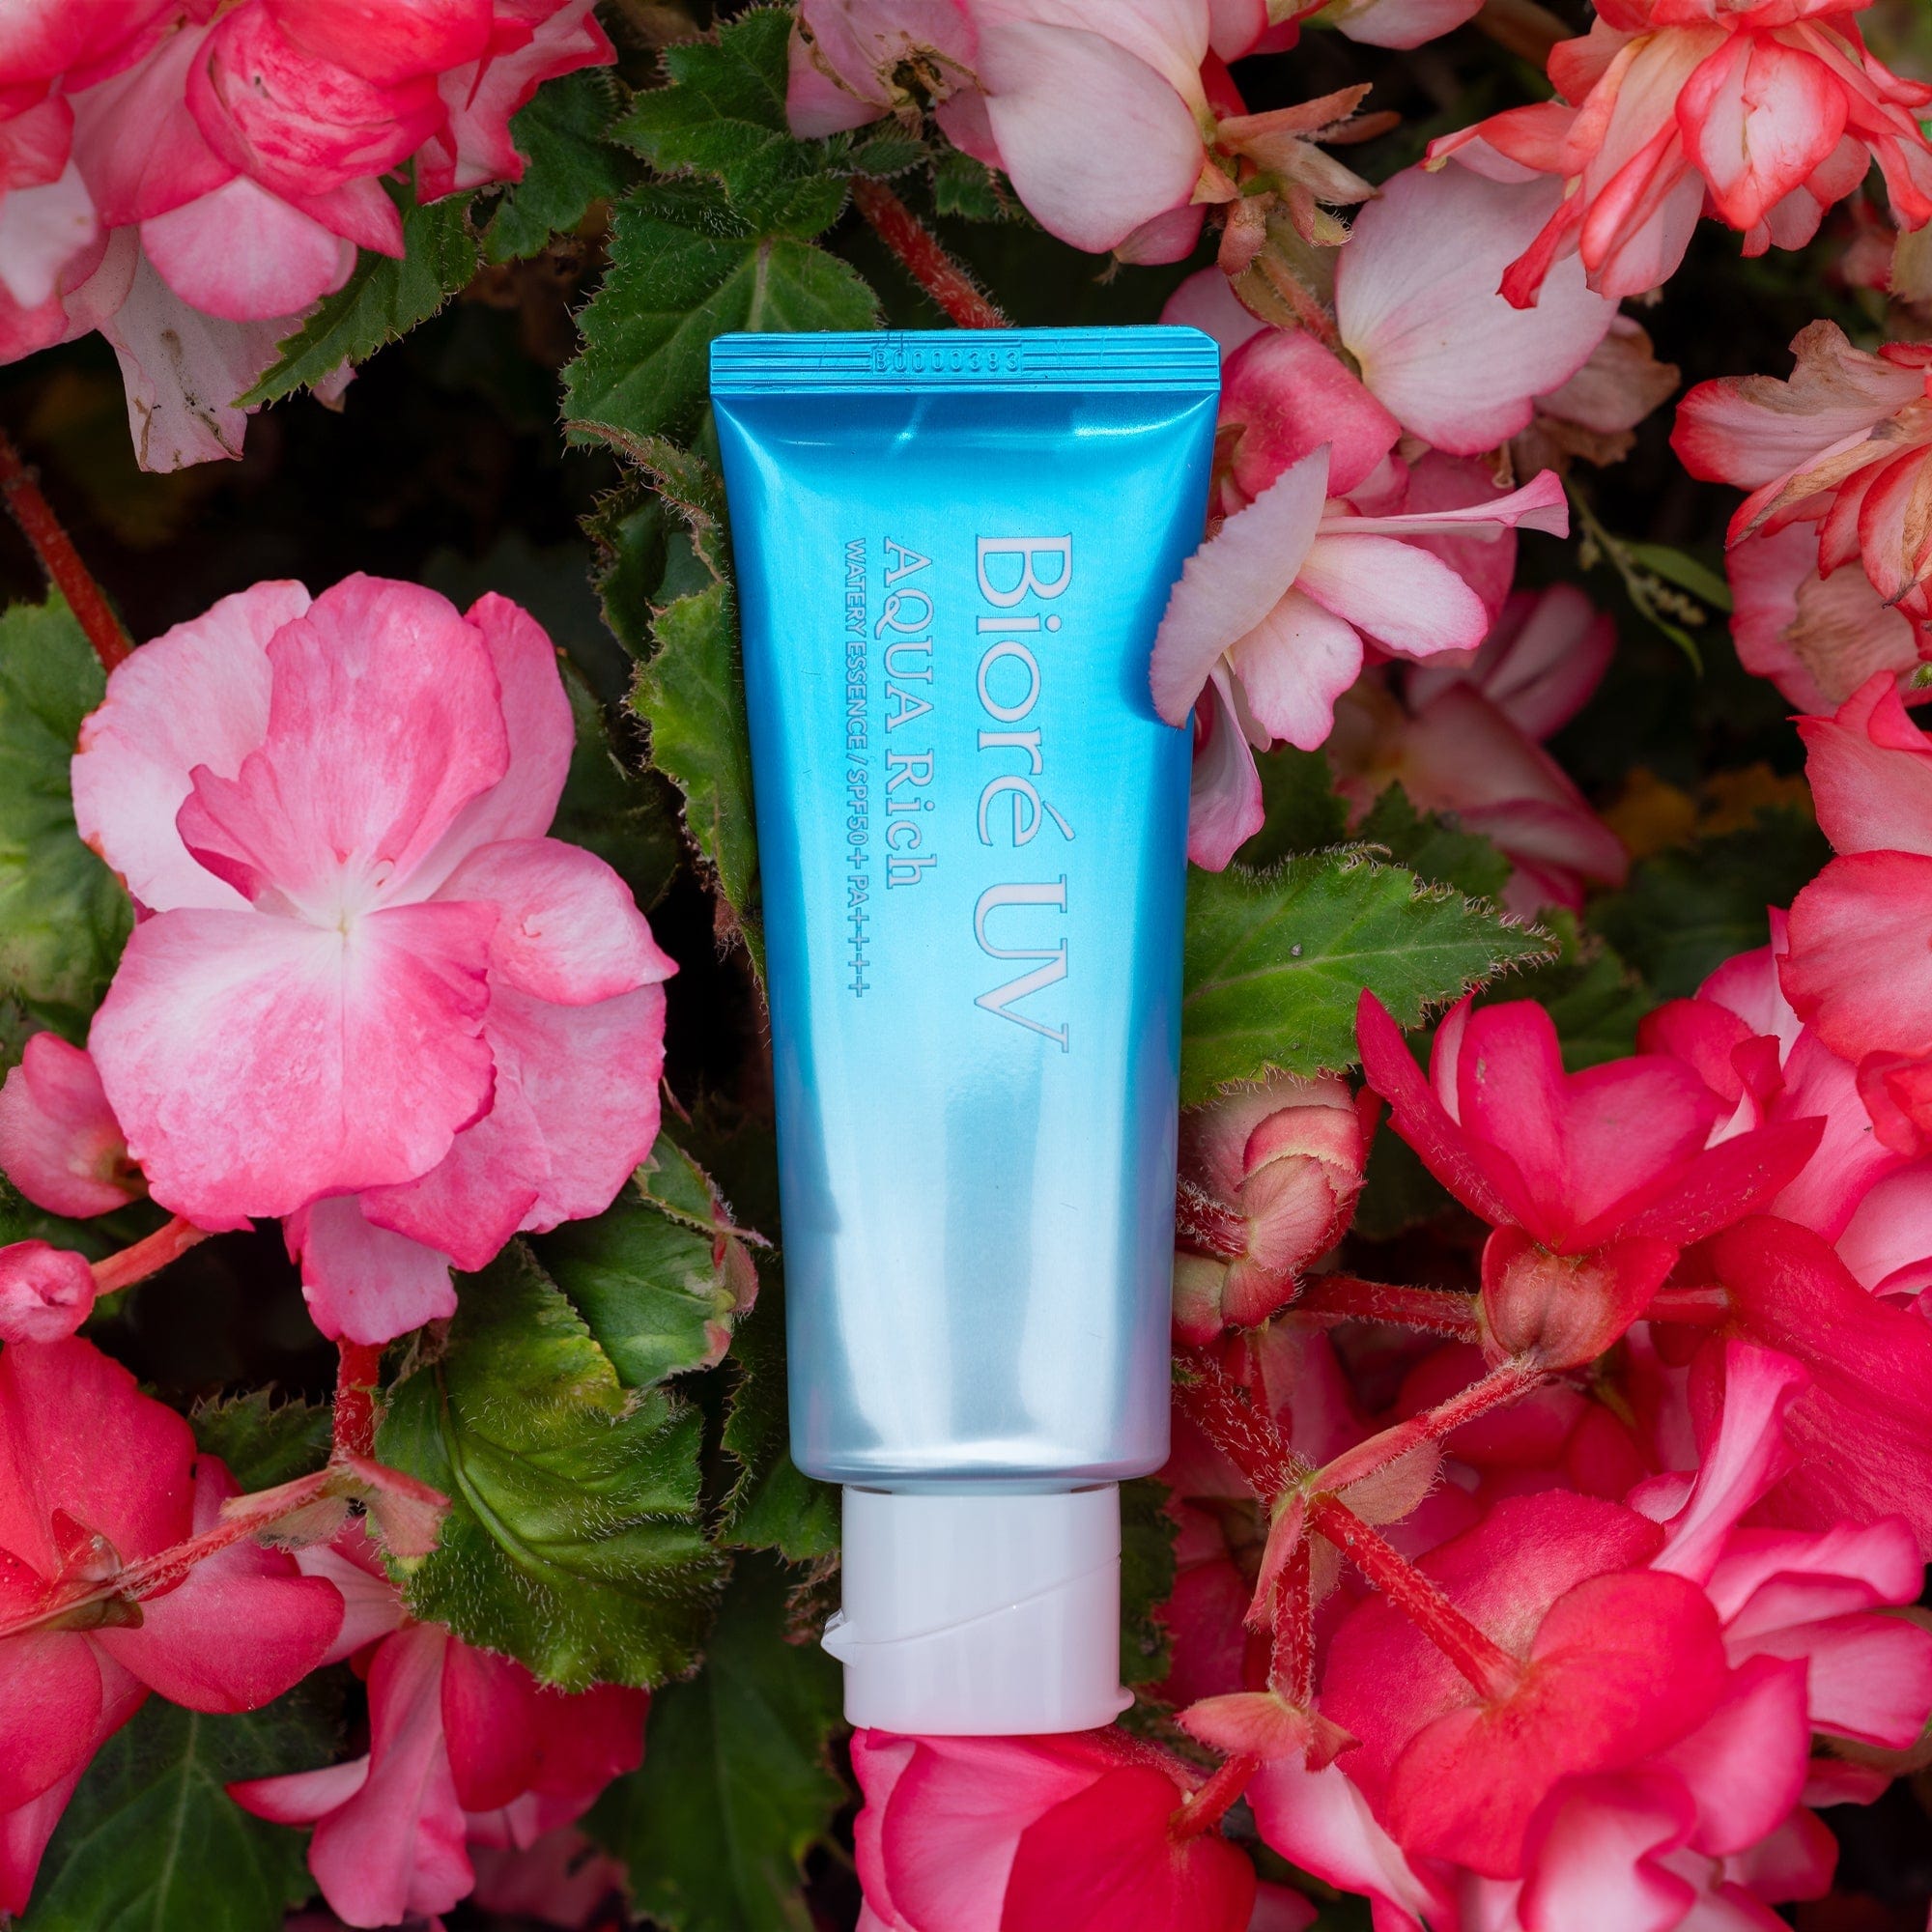 Photograph of Biore Aqua Rich Watery Essence Sunscreen SPF 50+ PA++++ in a bed of pink flowers